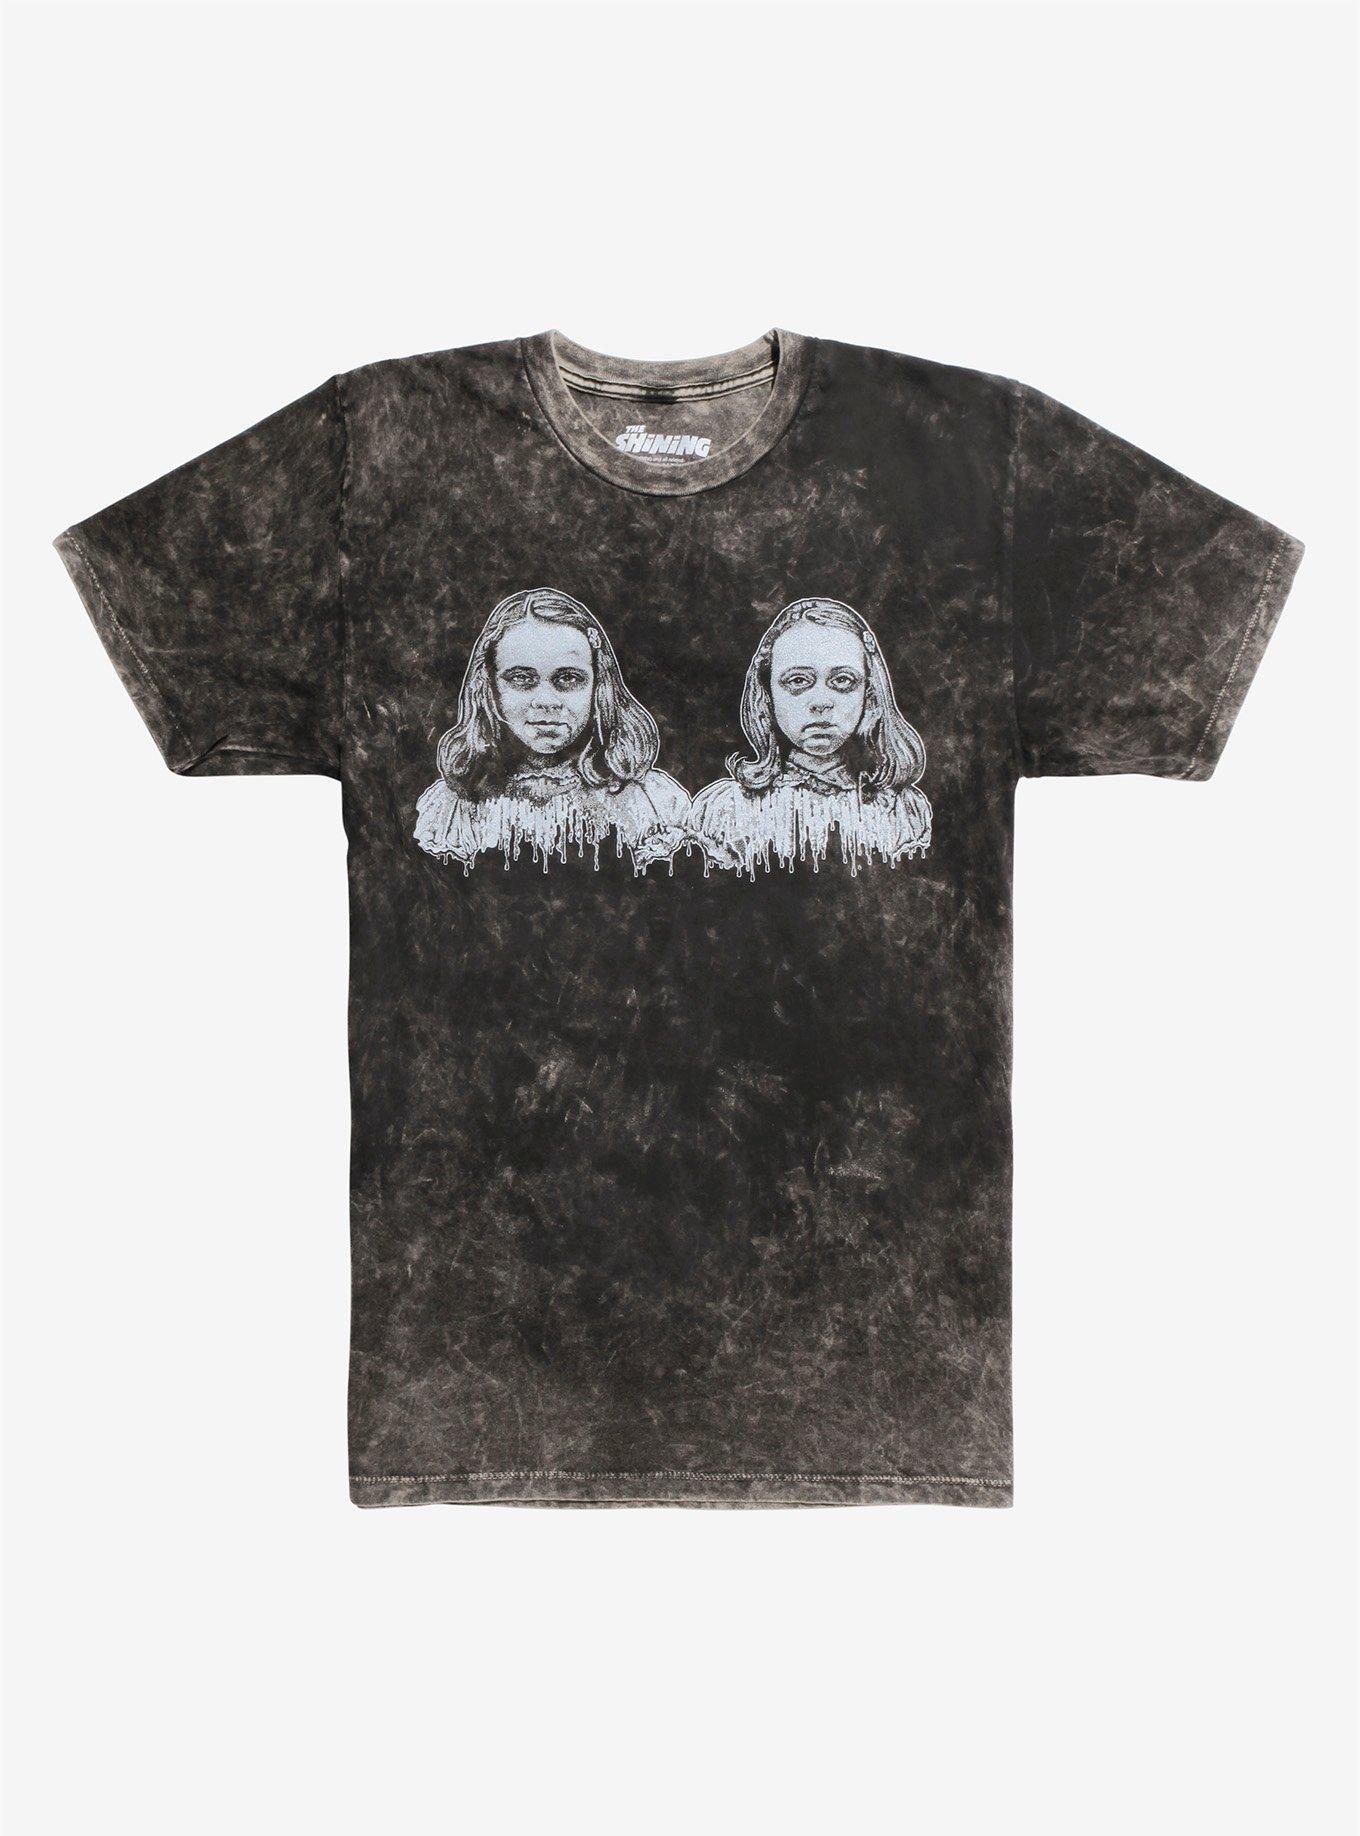 The Shining Twins Redrum Wash T-shirt Hot Topic Exclusive, GREY, hi-res